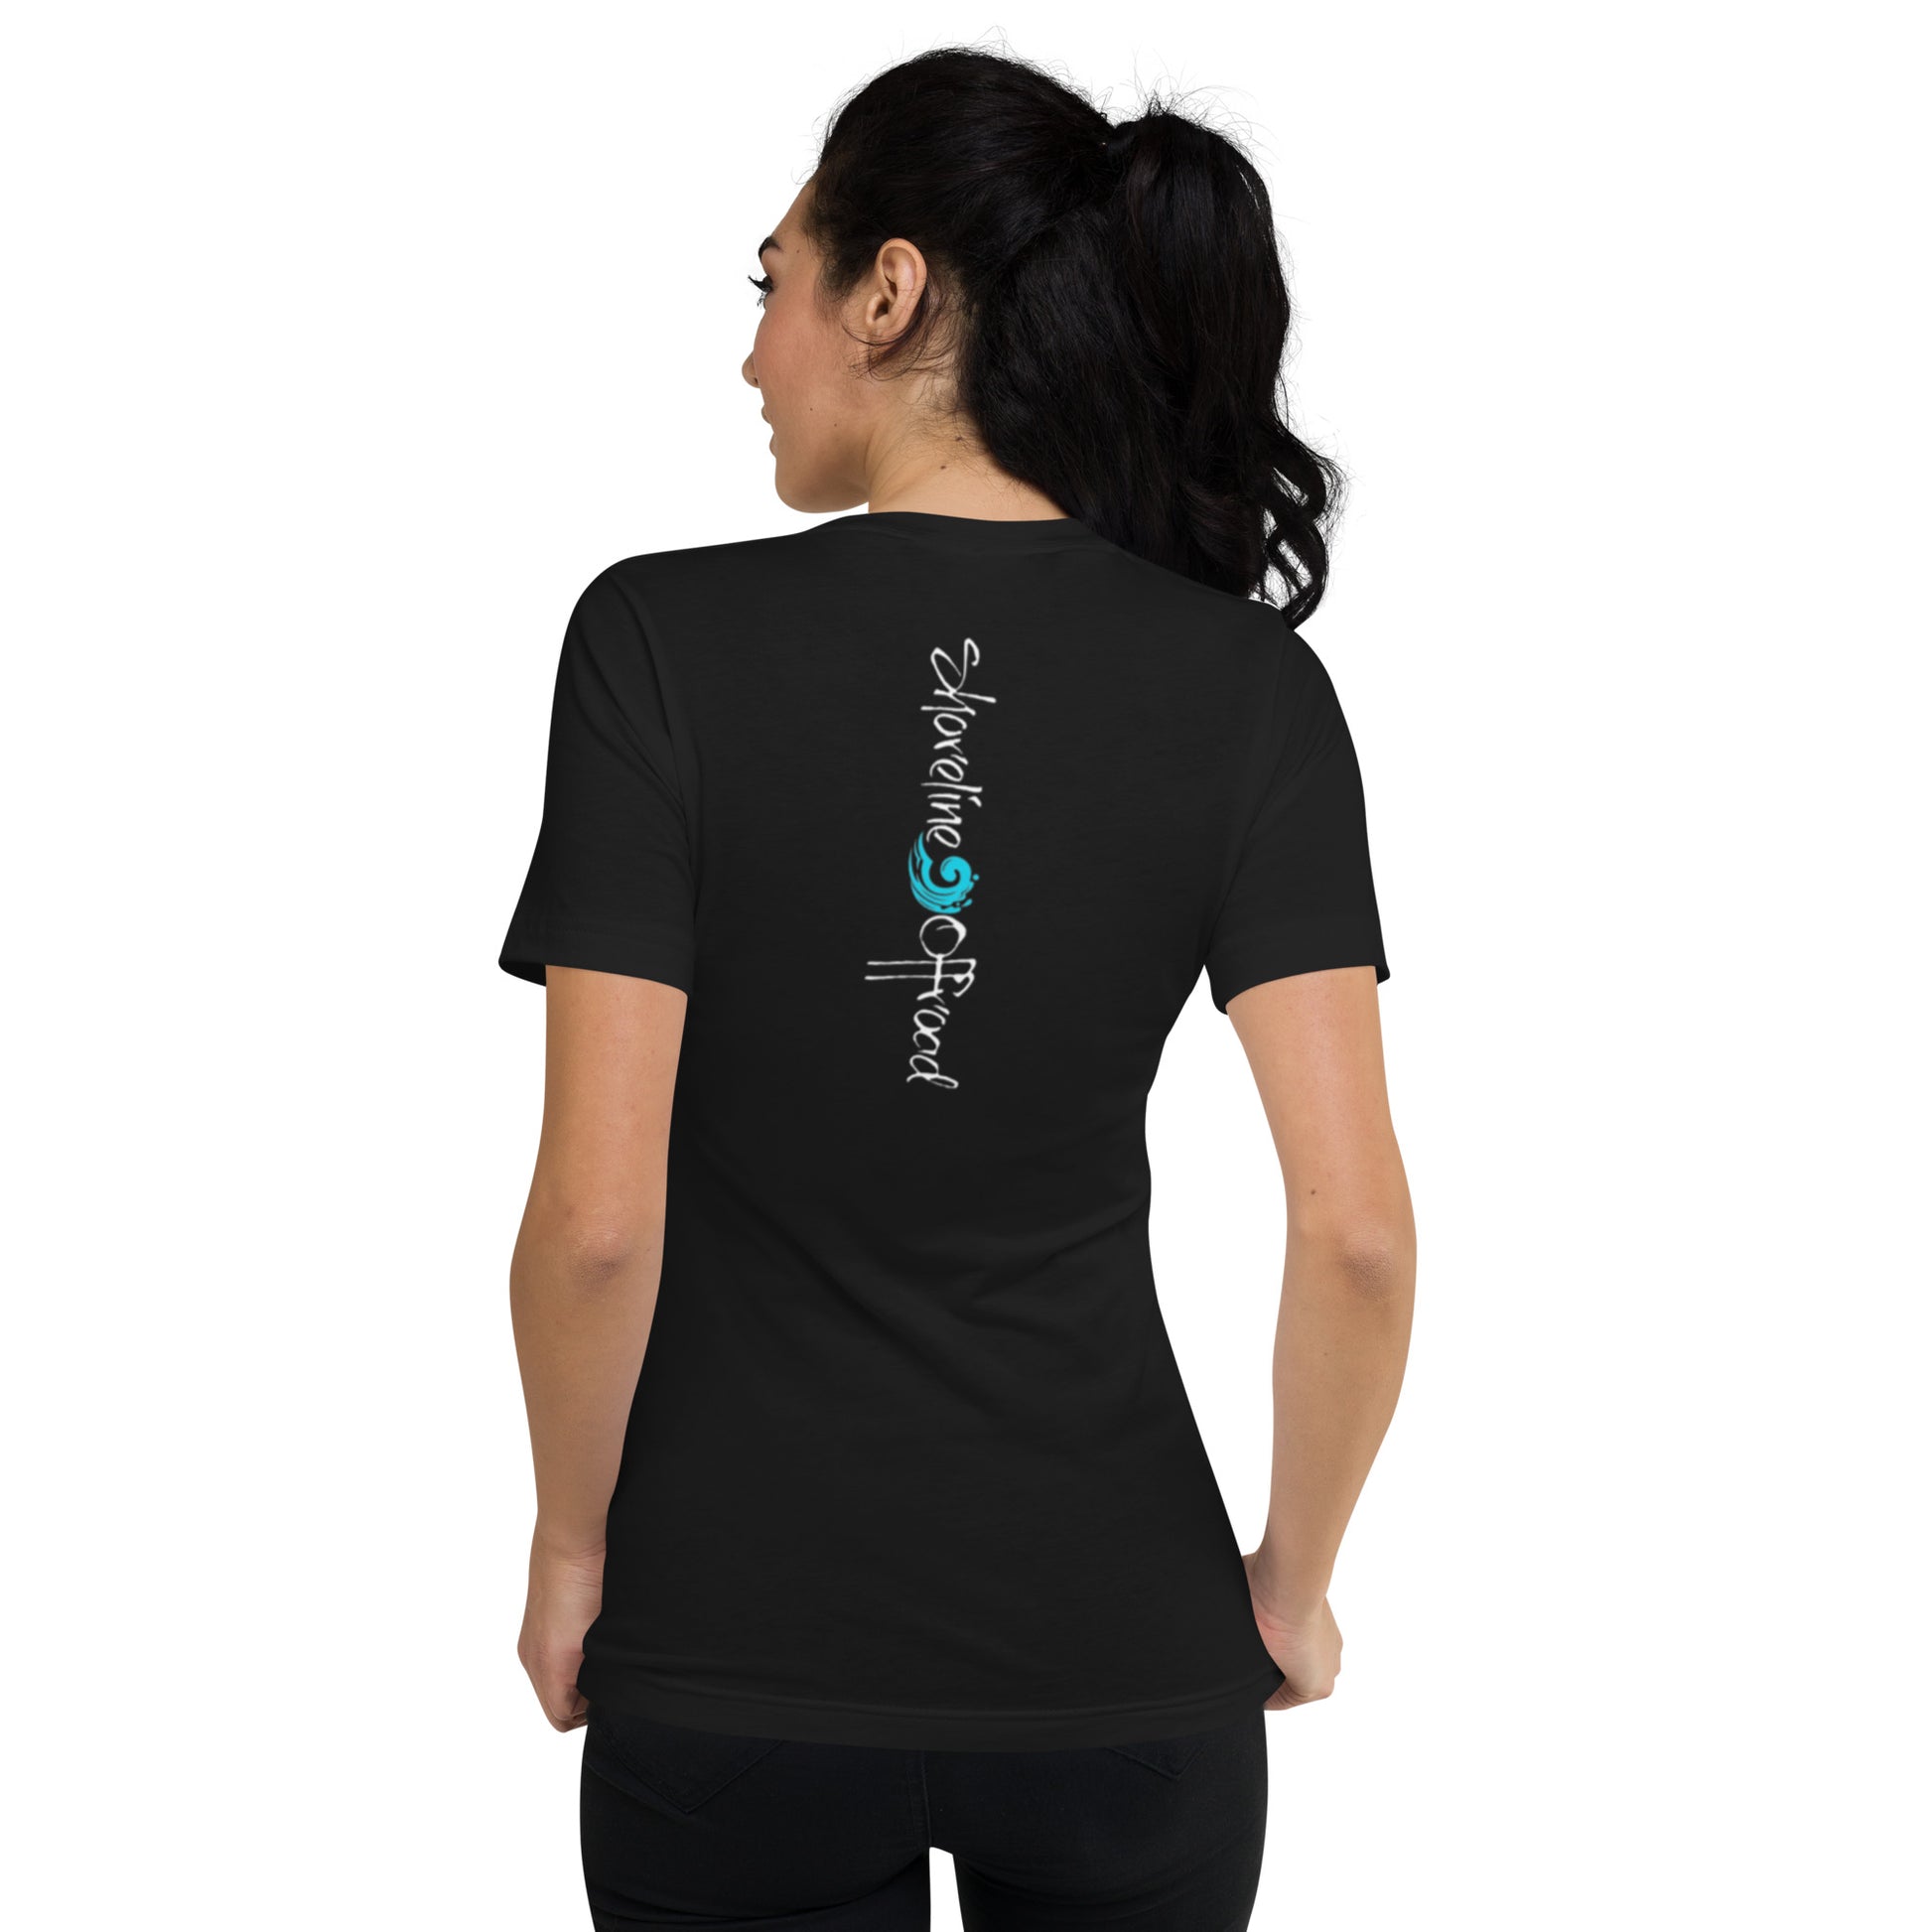 a woman wearing a black t - shirt with a blue bird on it